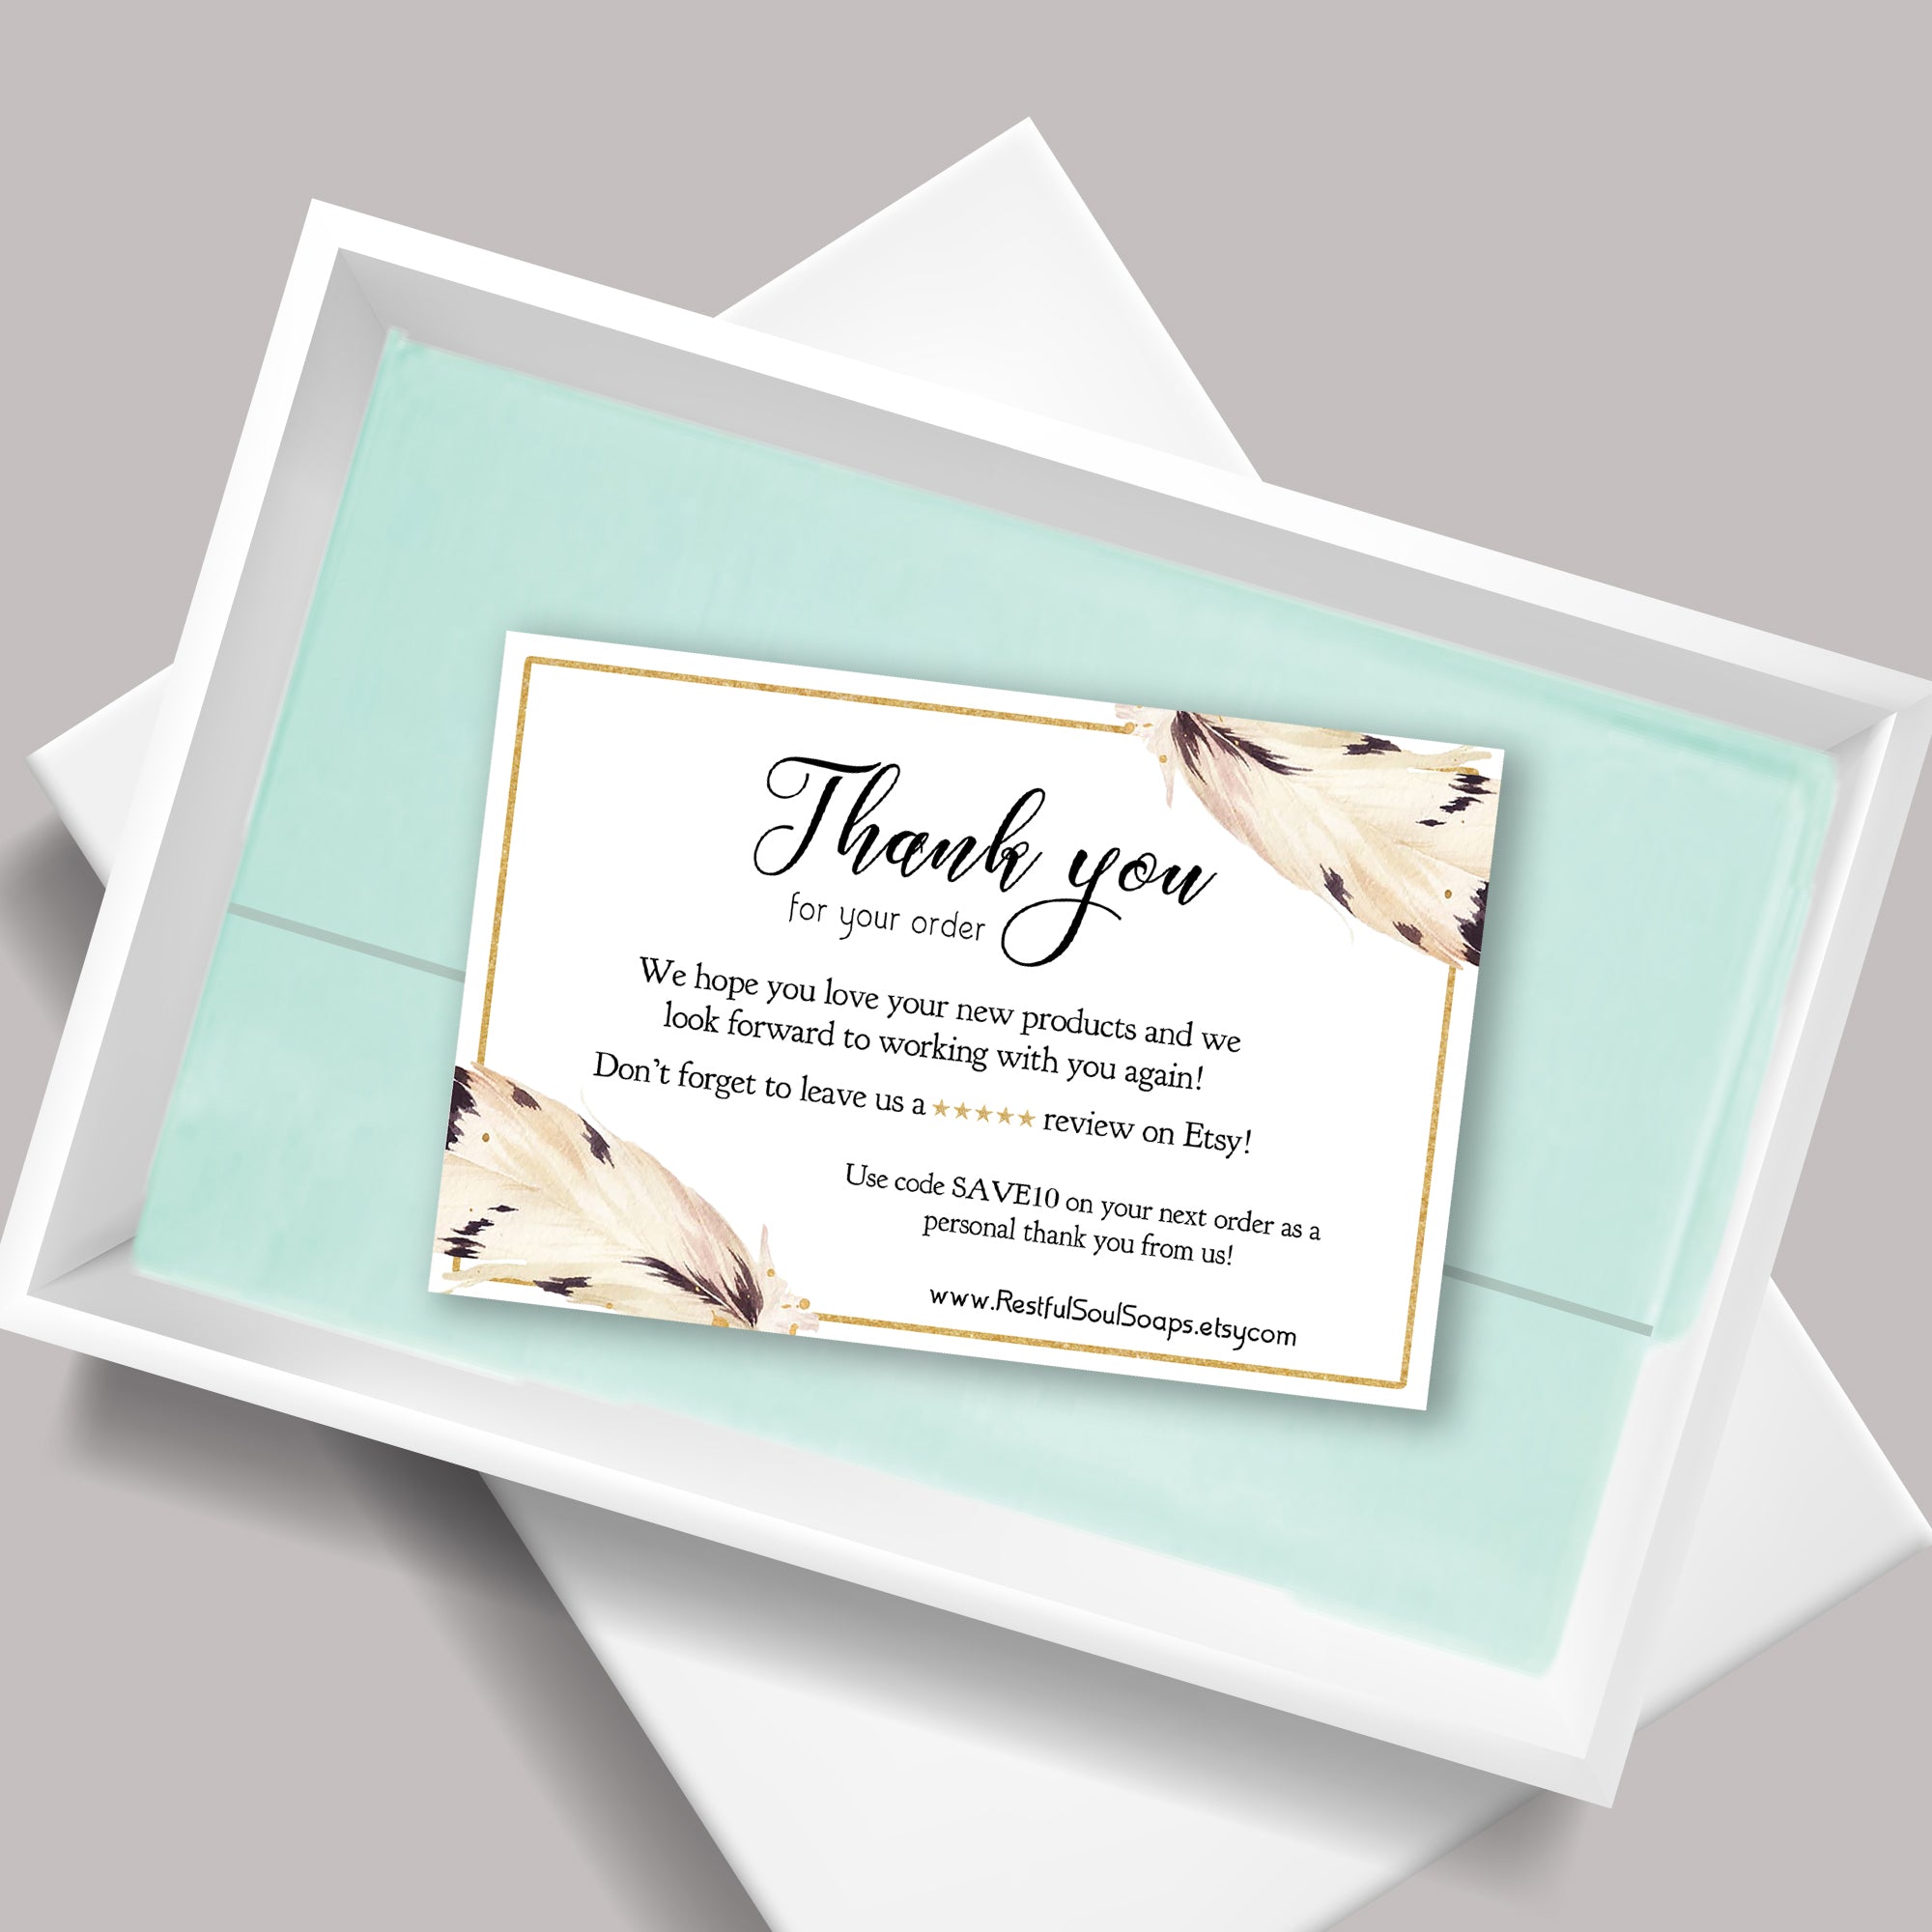 Printed 4x6 Cards - Standard Size Cards Invitations - Custom